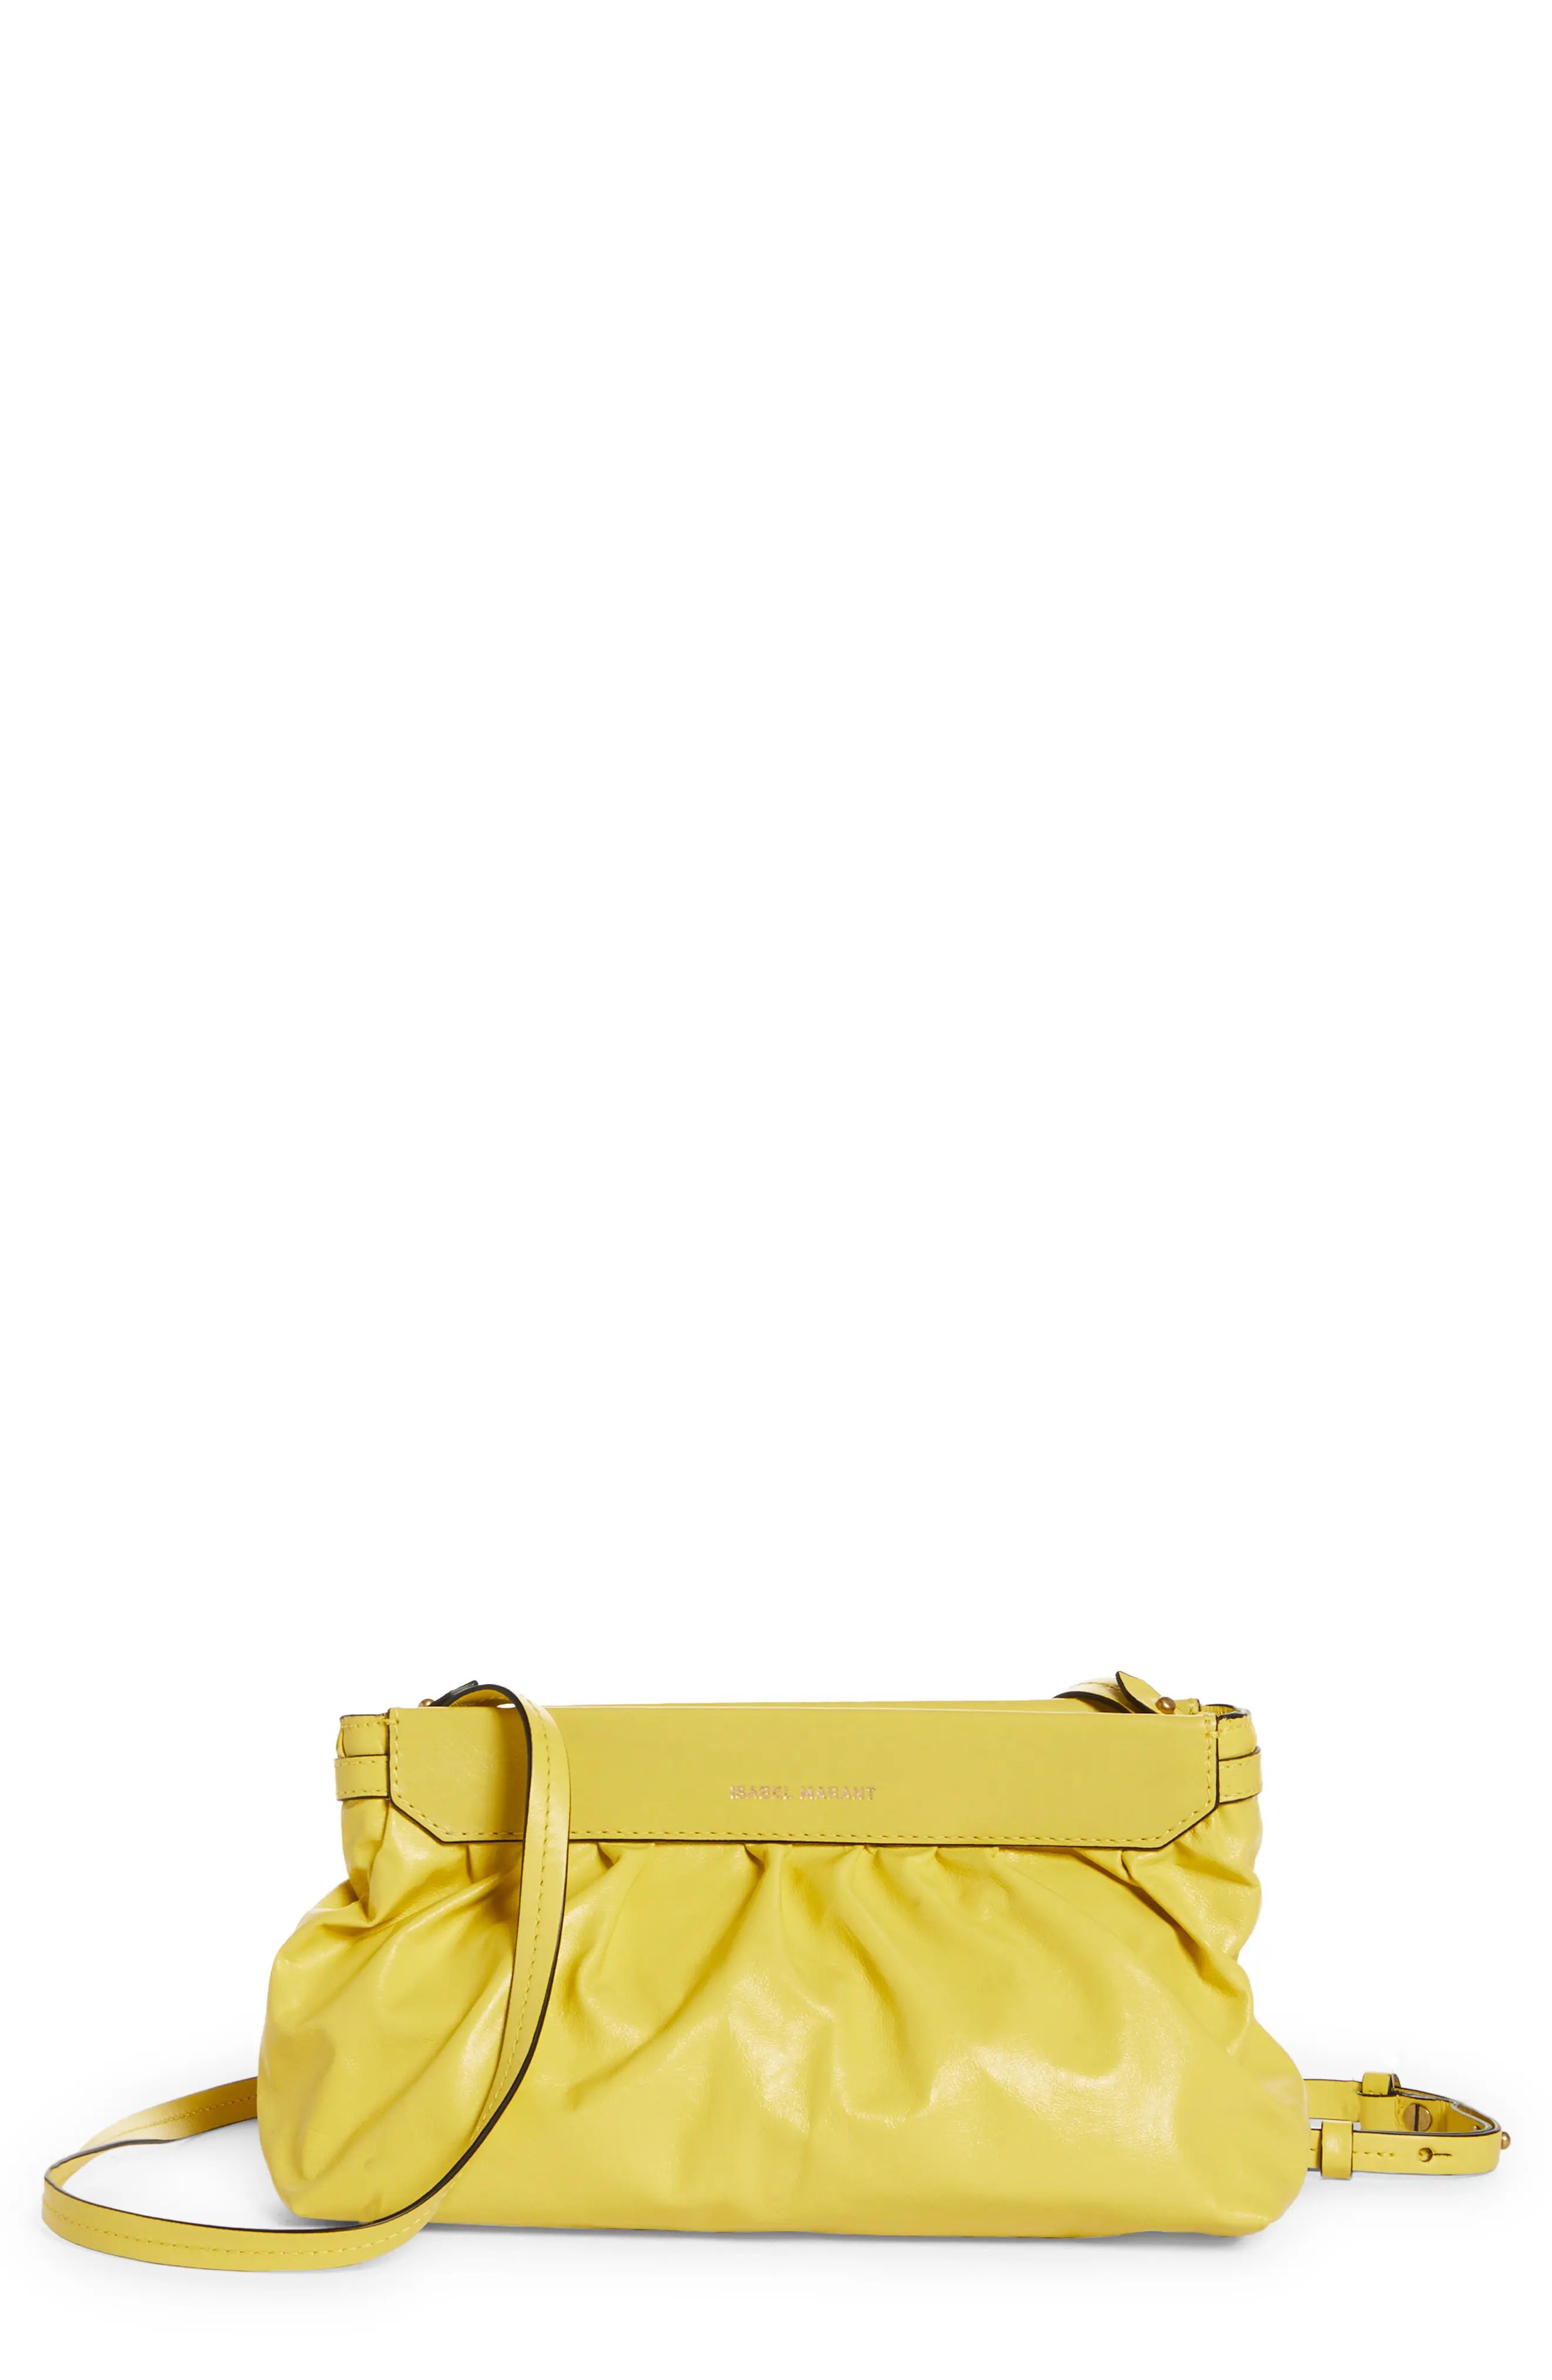 Isabel Marant Luzes Leather Crossbody Bag in Yellow at Nordstrom | Nordstrom